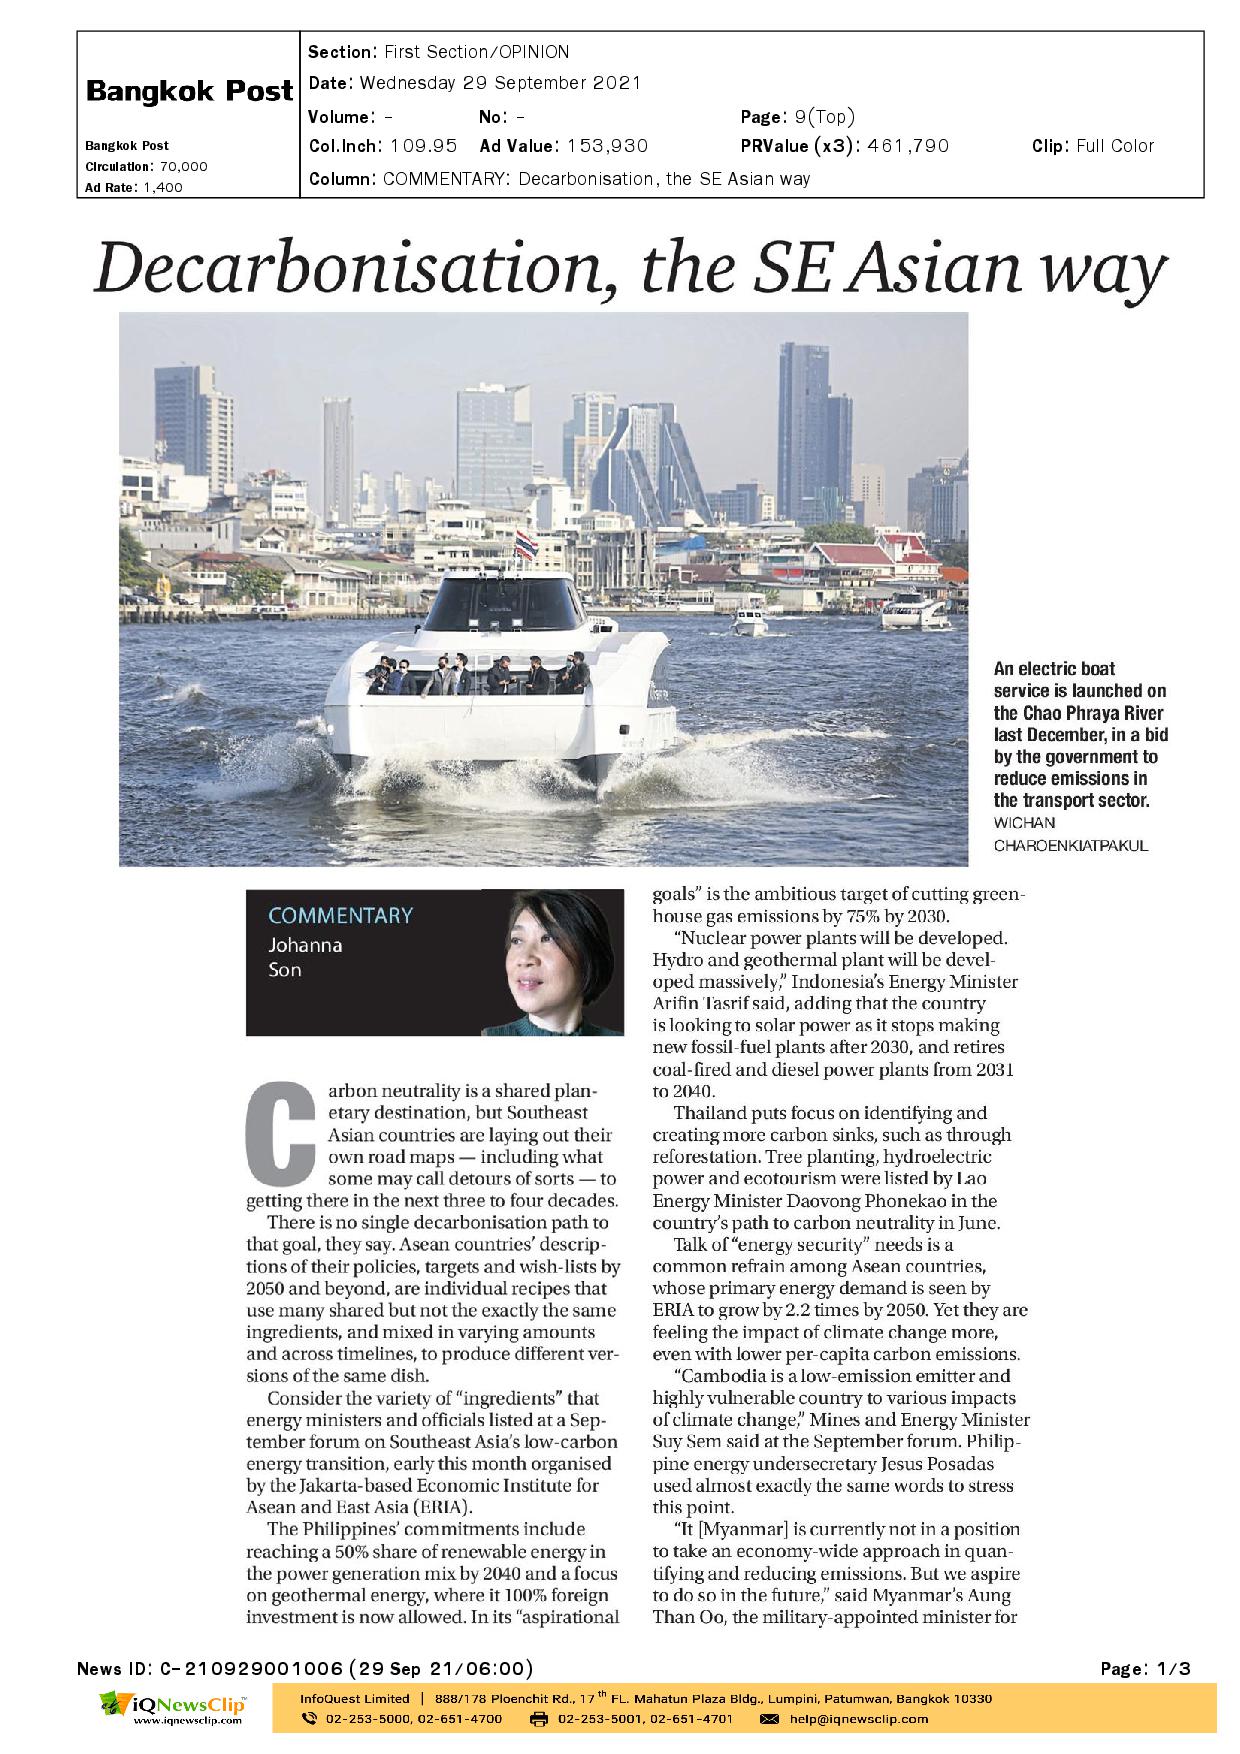 Decarbonisation, the SE Asian way